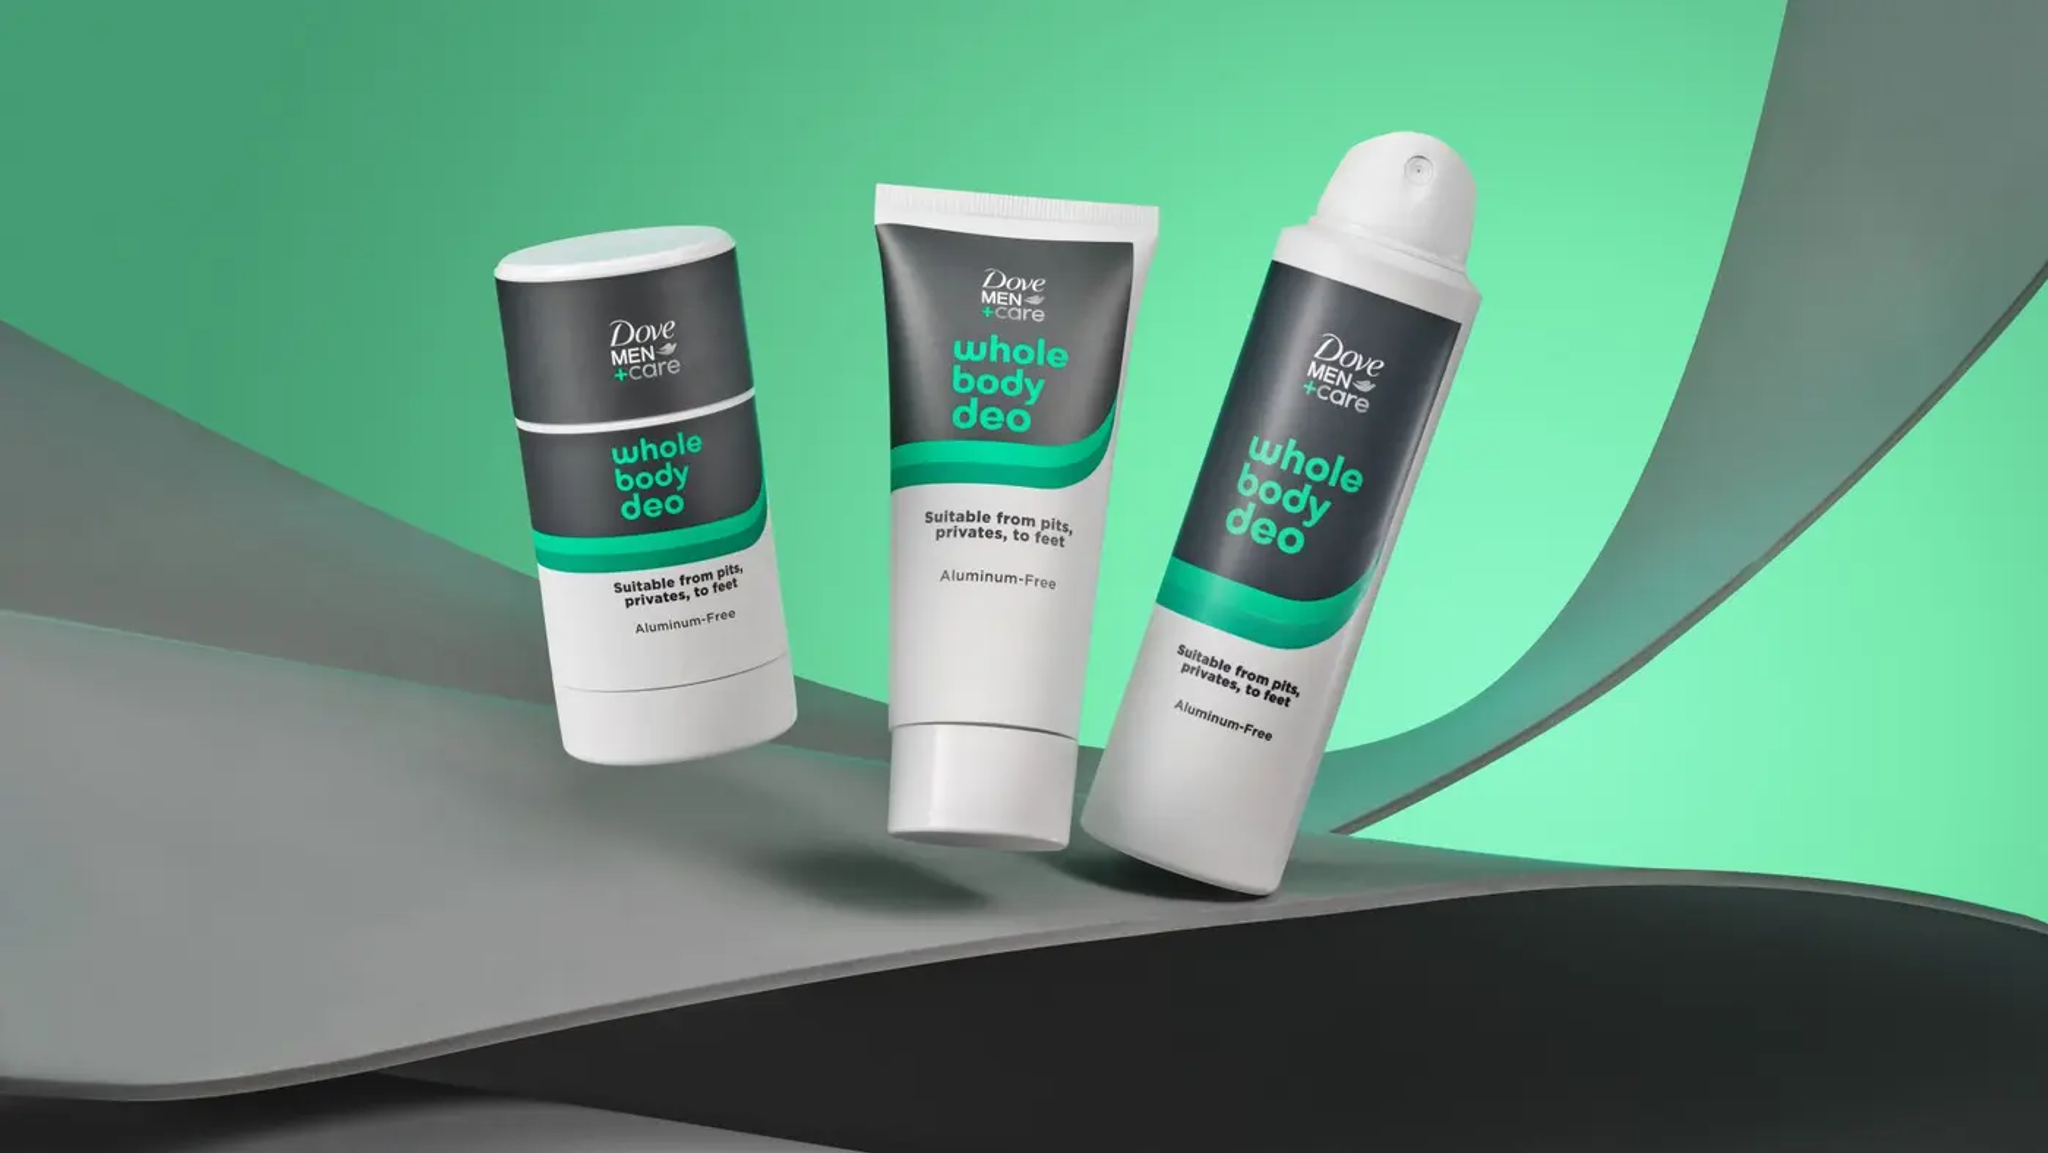 Dove launches whole body deodorant as hygiene norms shift